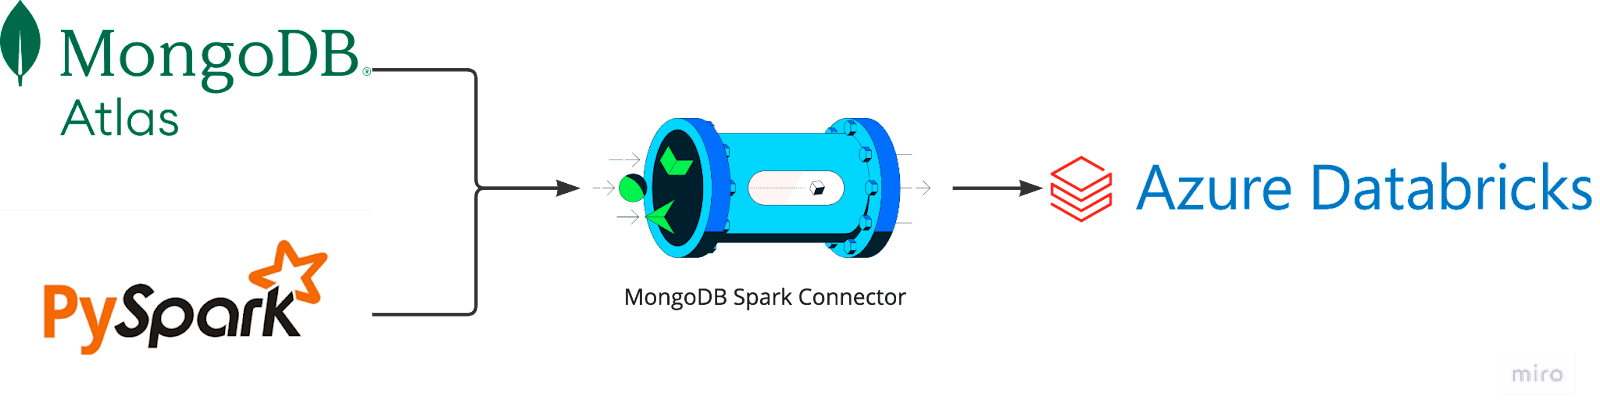 Alt Text: technical diagram showing how Atlas, PySpark, the MongoDB Spark Connector, and Azure Databricks are integrated